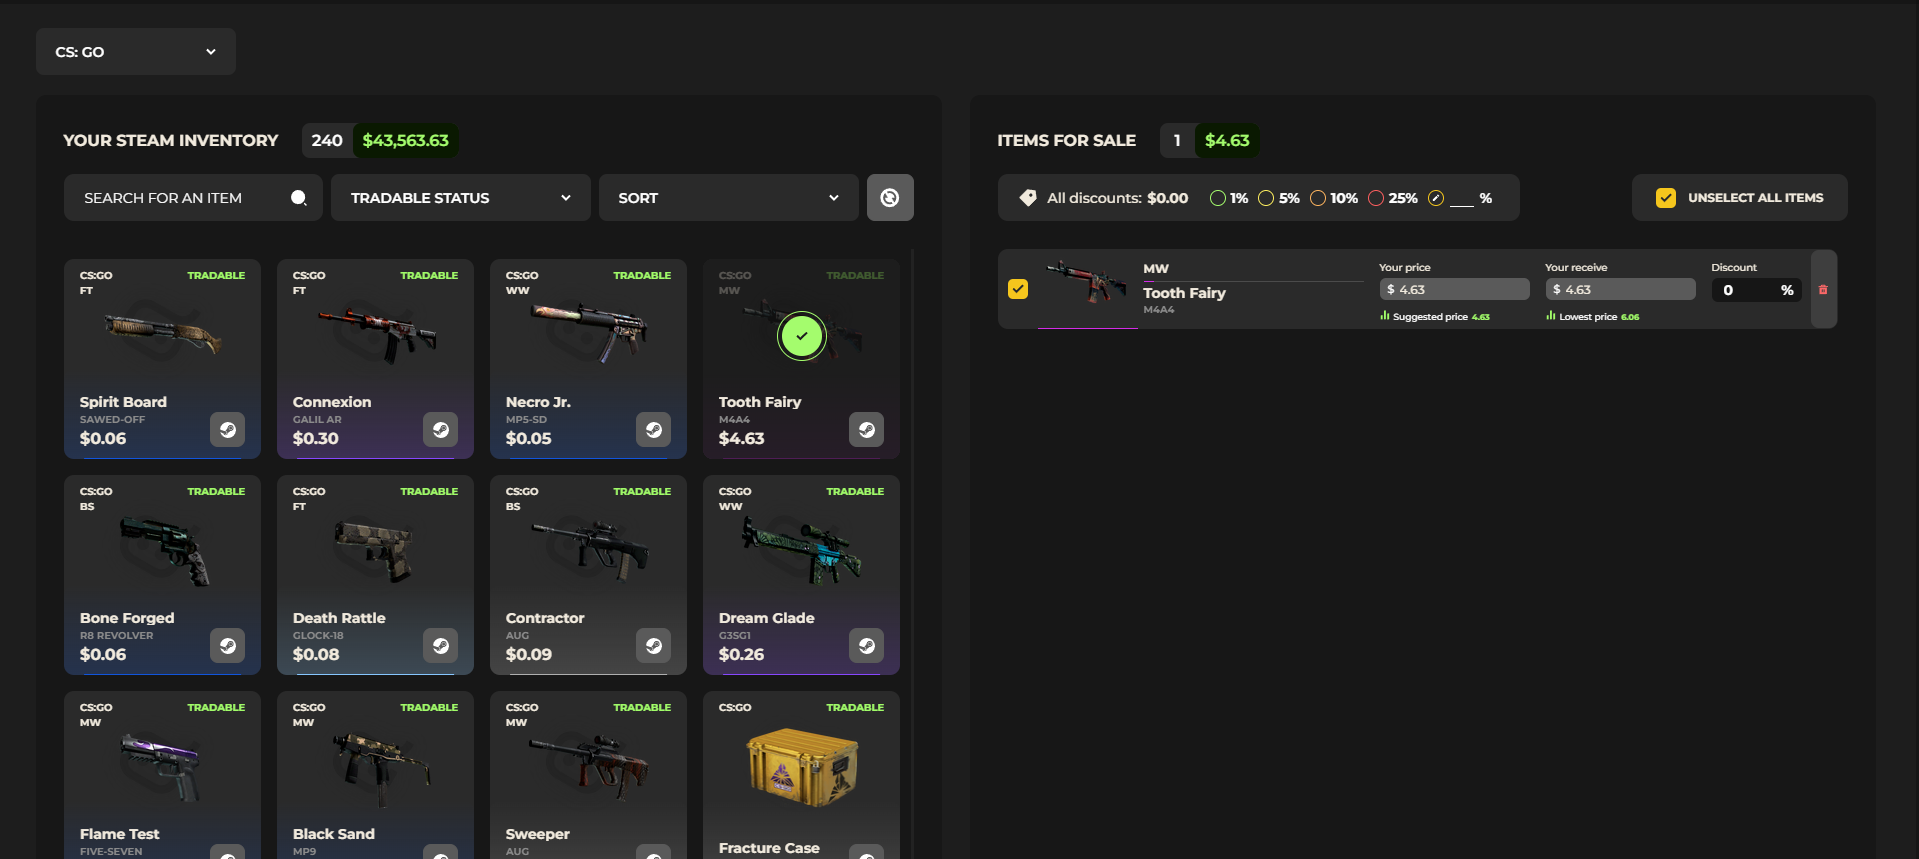 How to sell skins on Drodly Marketplace?